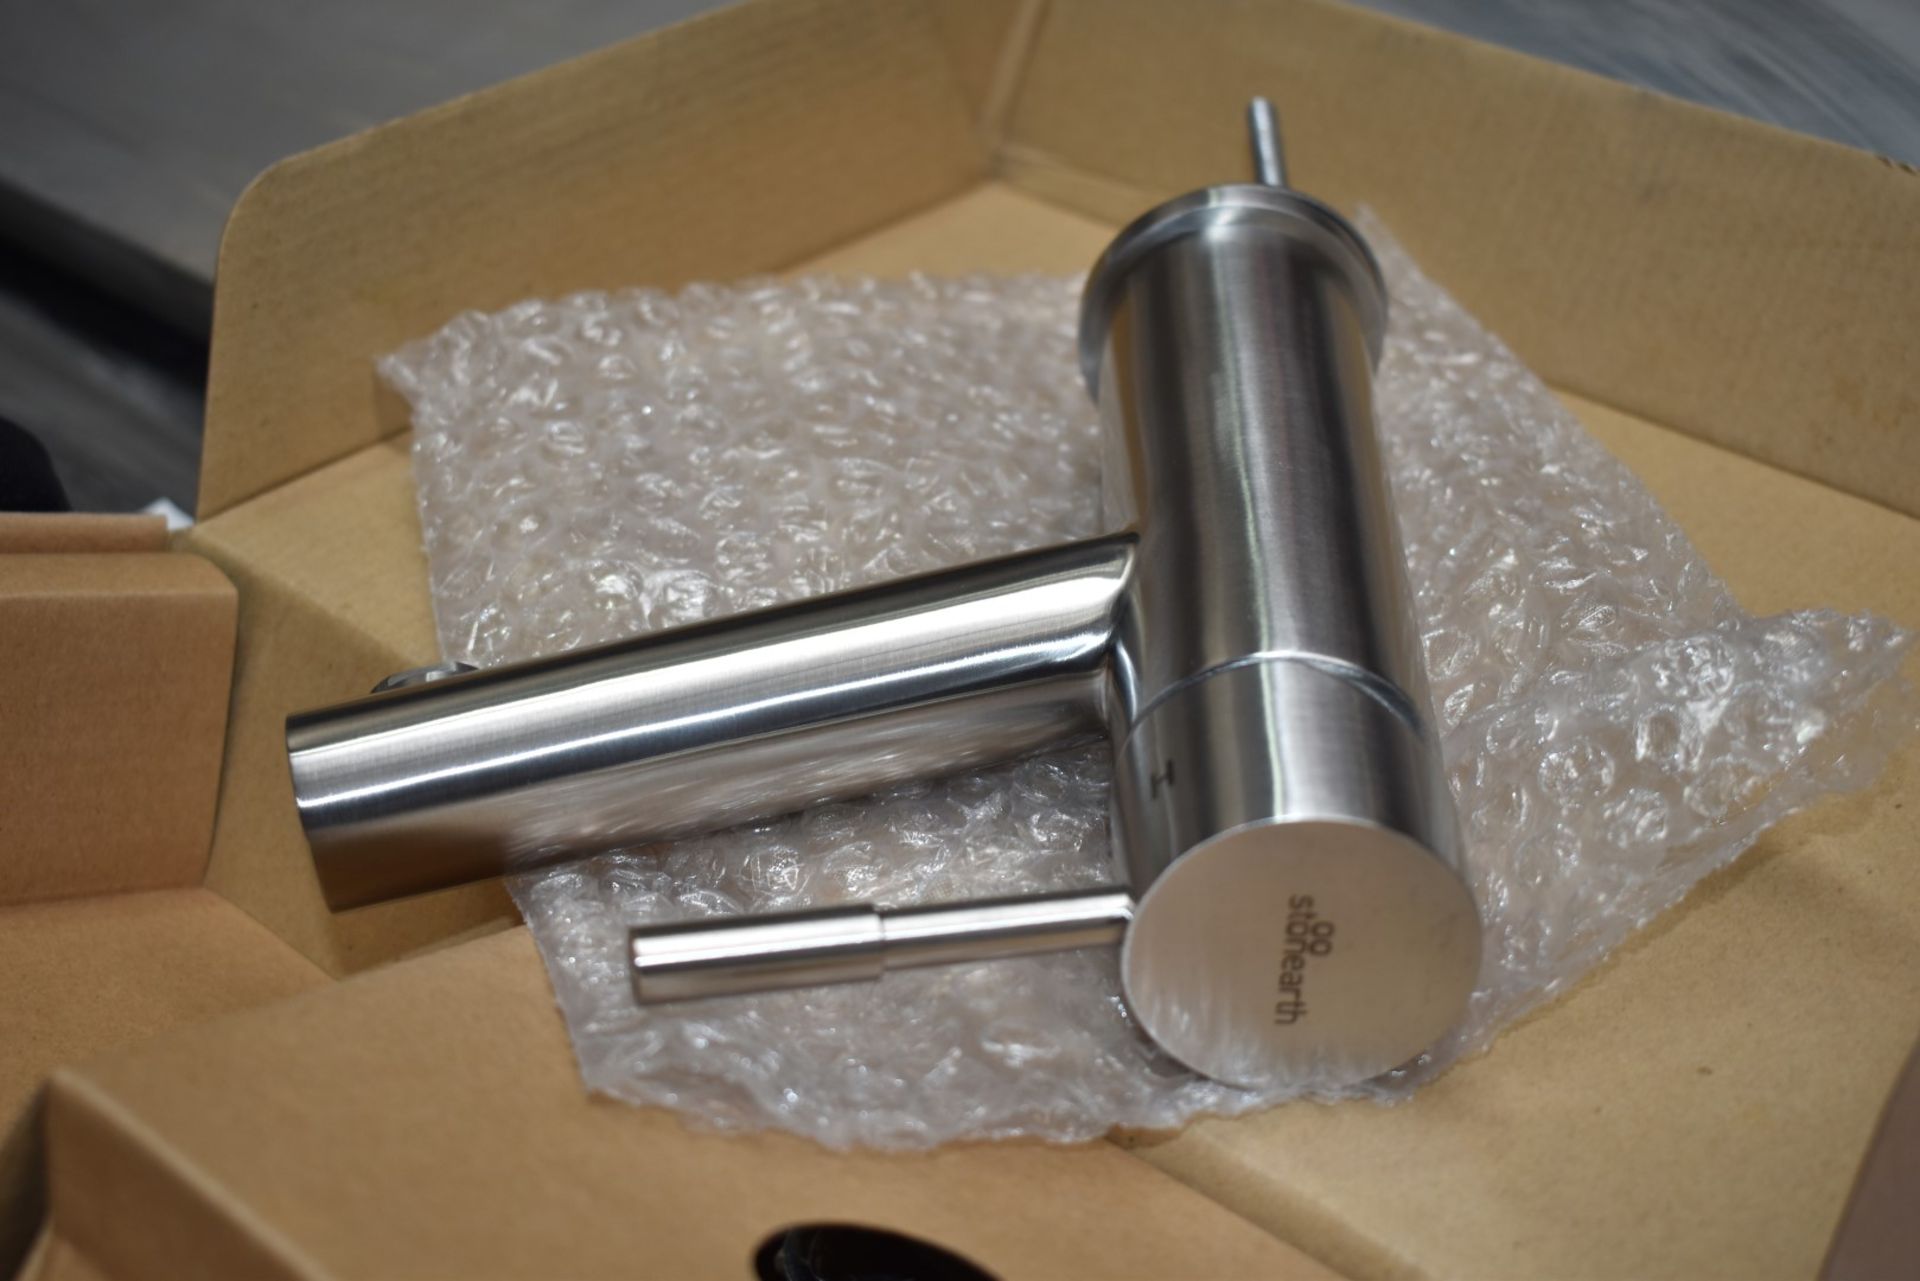 1 x Stonearth 'Hali' Stainless Steel Basin Mixer Tap - Brand New & Boxed - RRP £245 - Ref: TP801 WH2 - Image 6 of 7